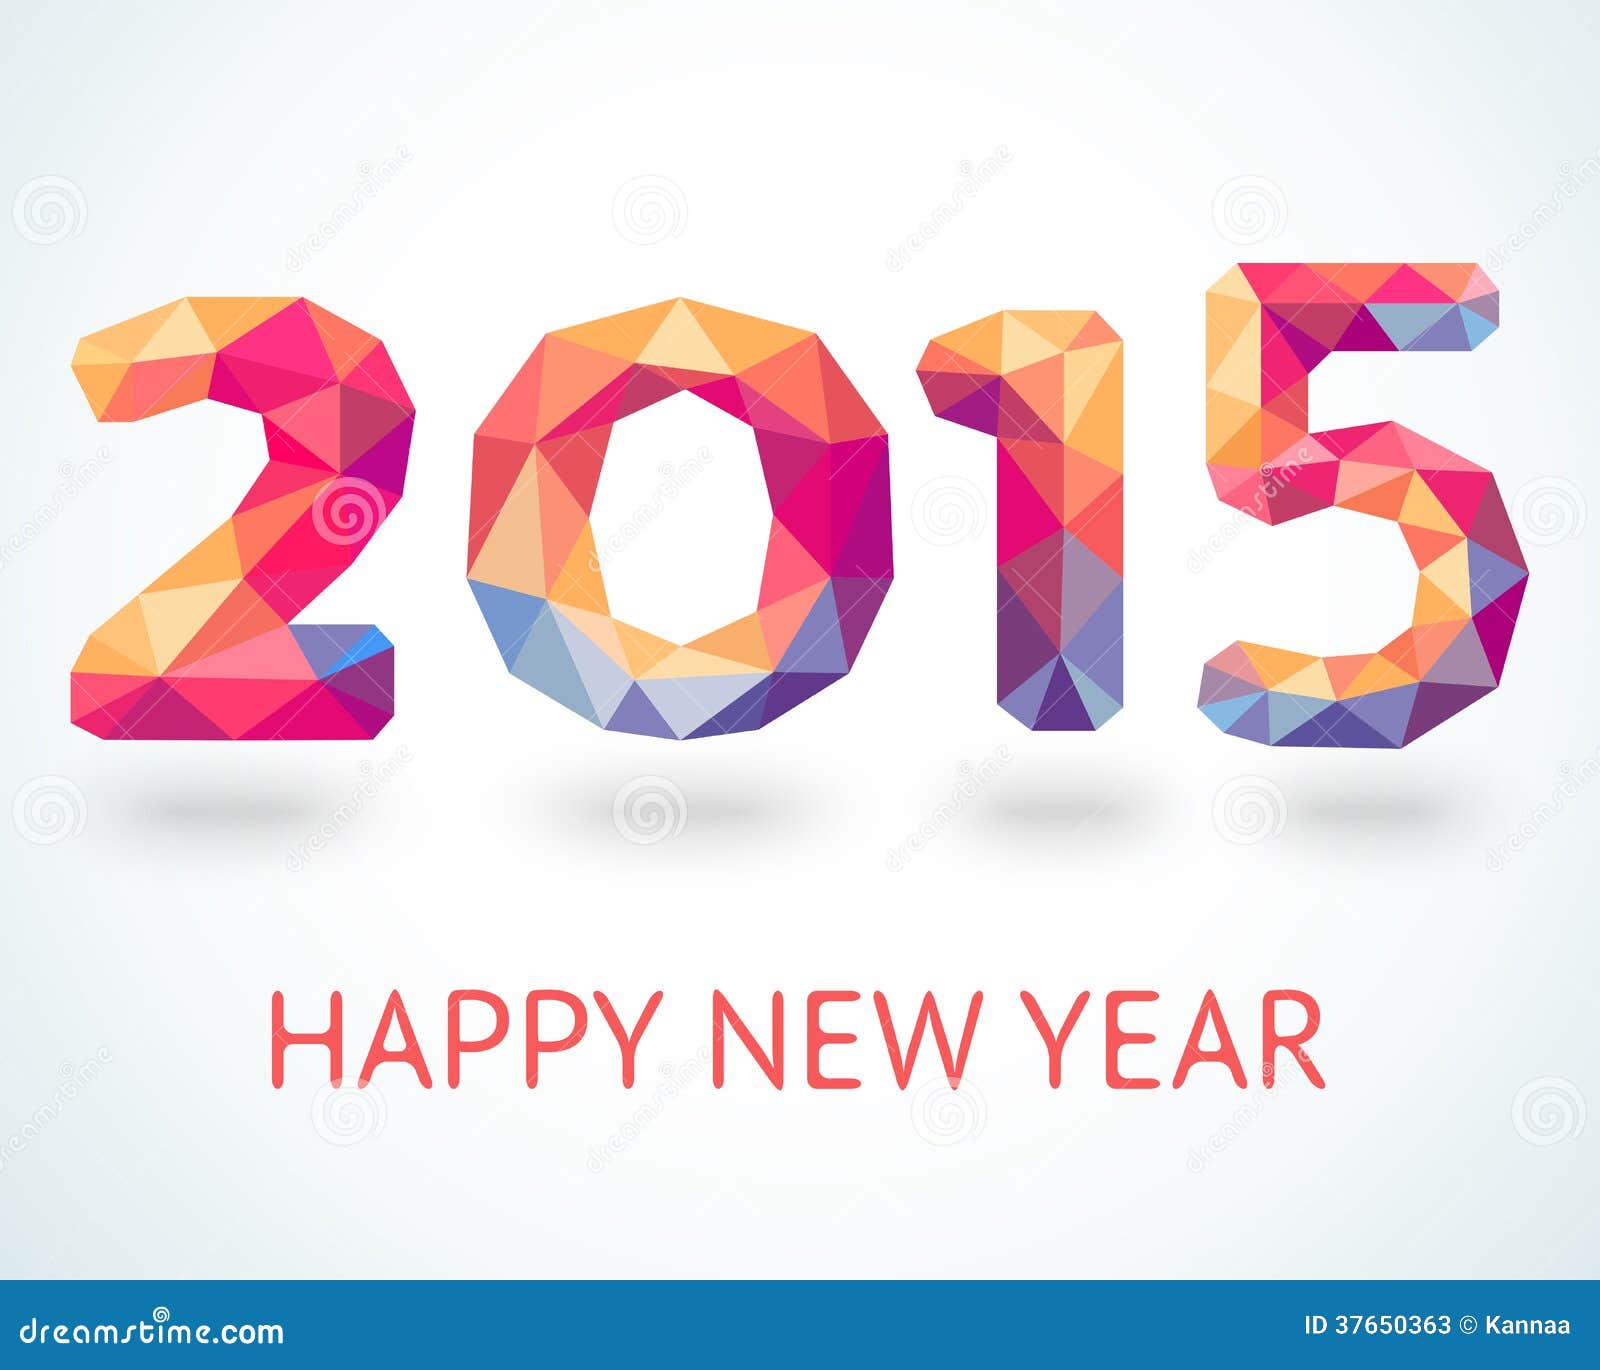 clipart new year greetings - photo #47